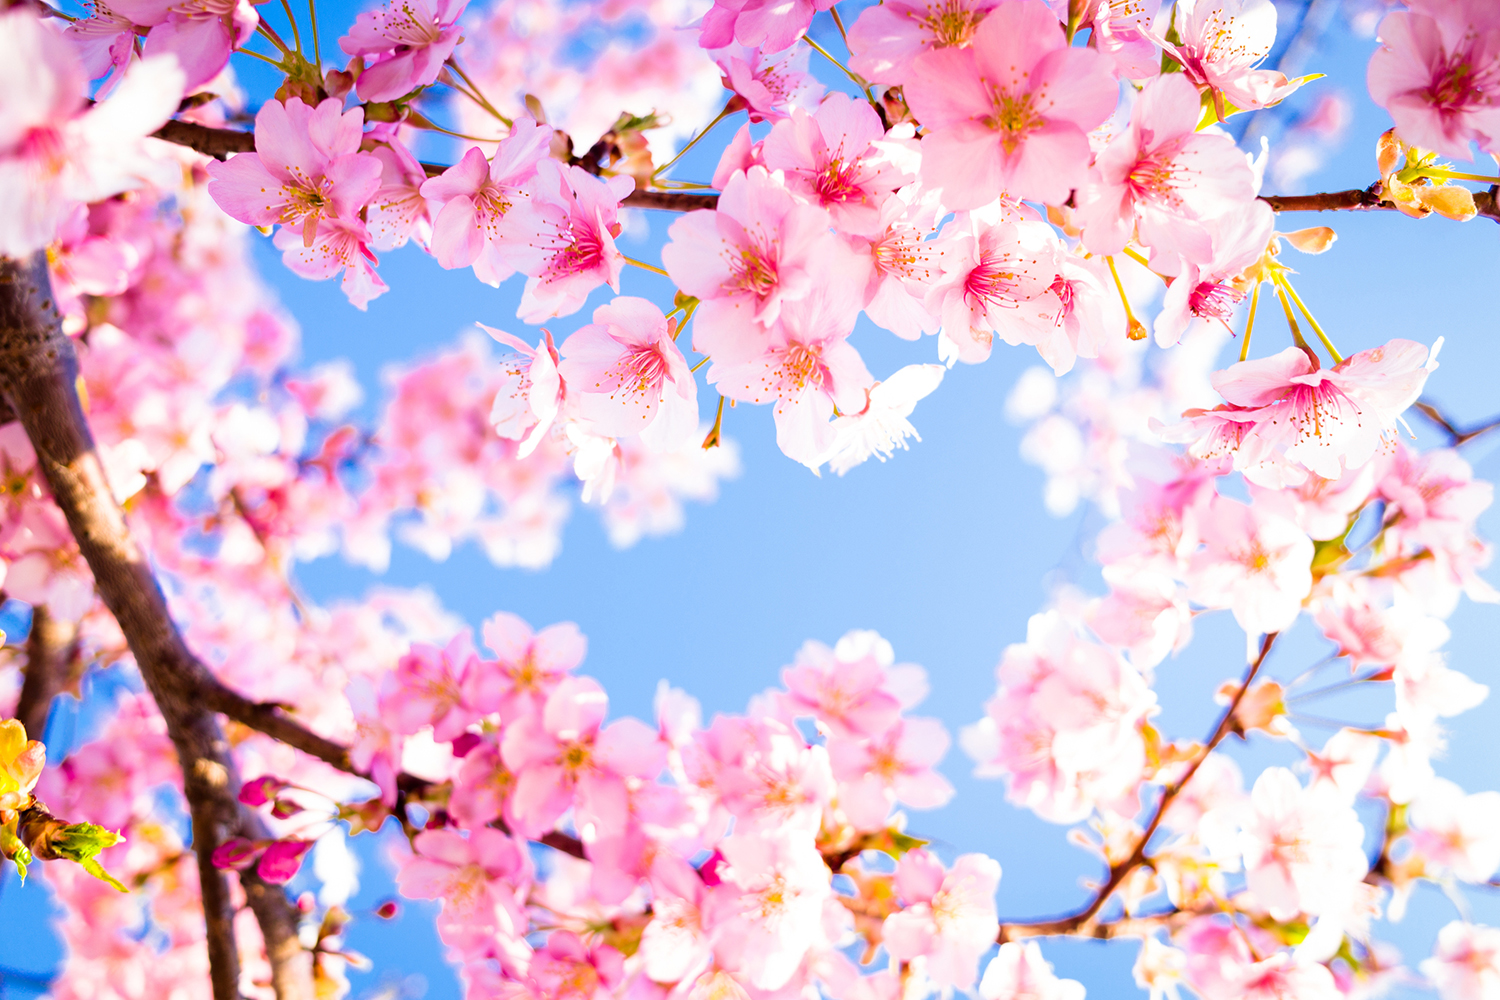 A cherry blossom festival has officially arrived in Australia! Better Homes and Gardens